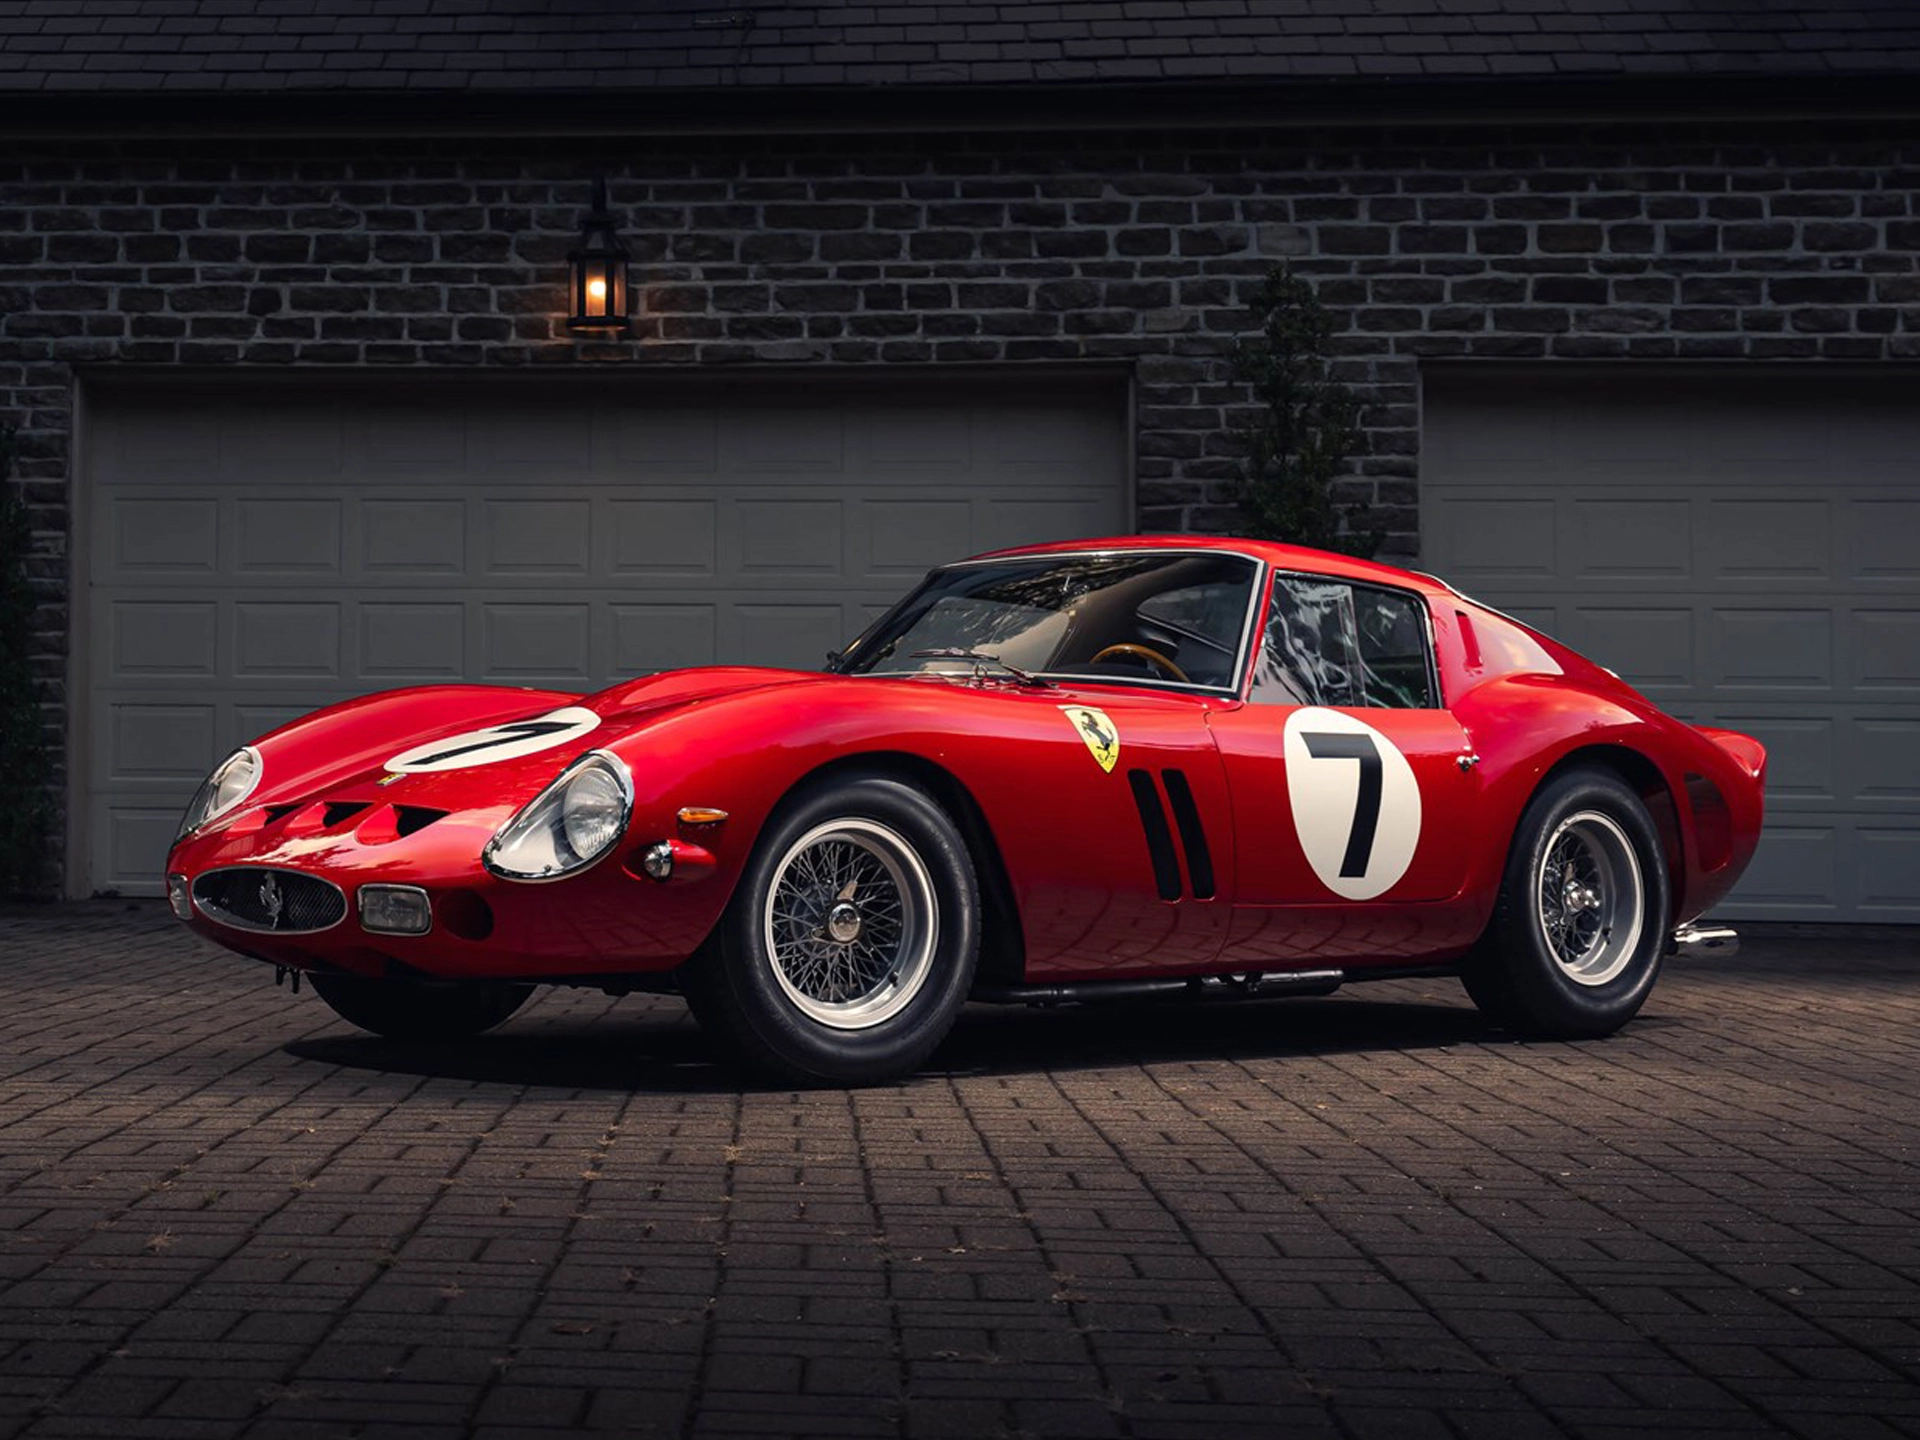 Ferrari 250 GTO in New York. Which way does the scale tip?